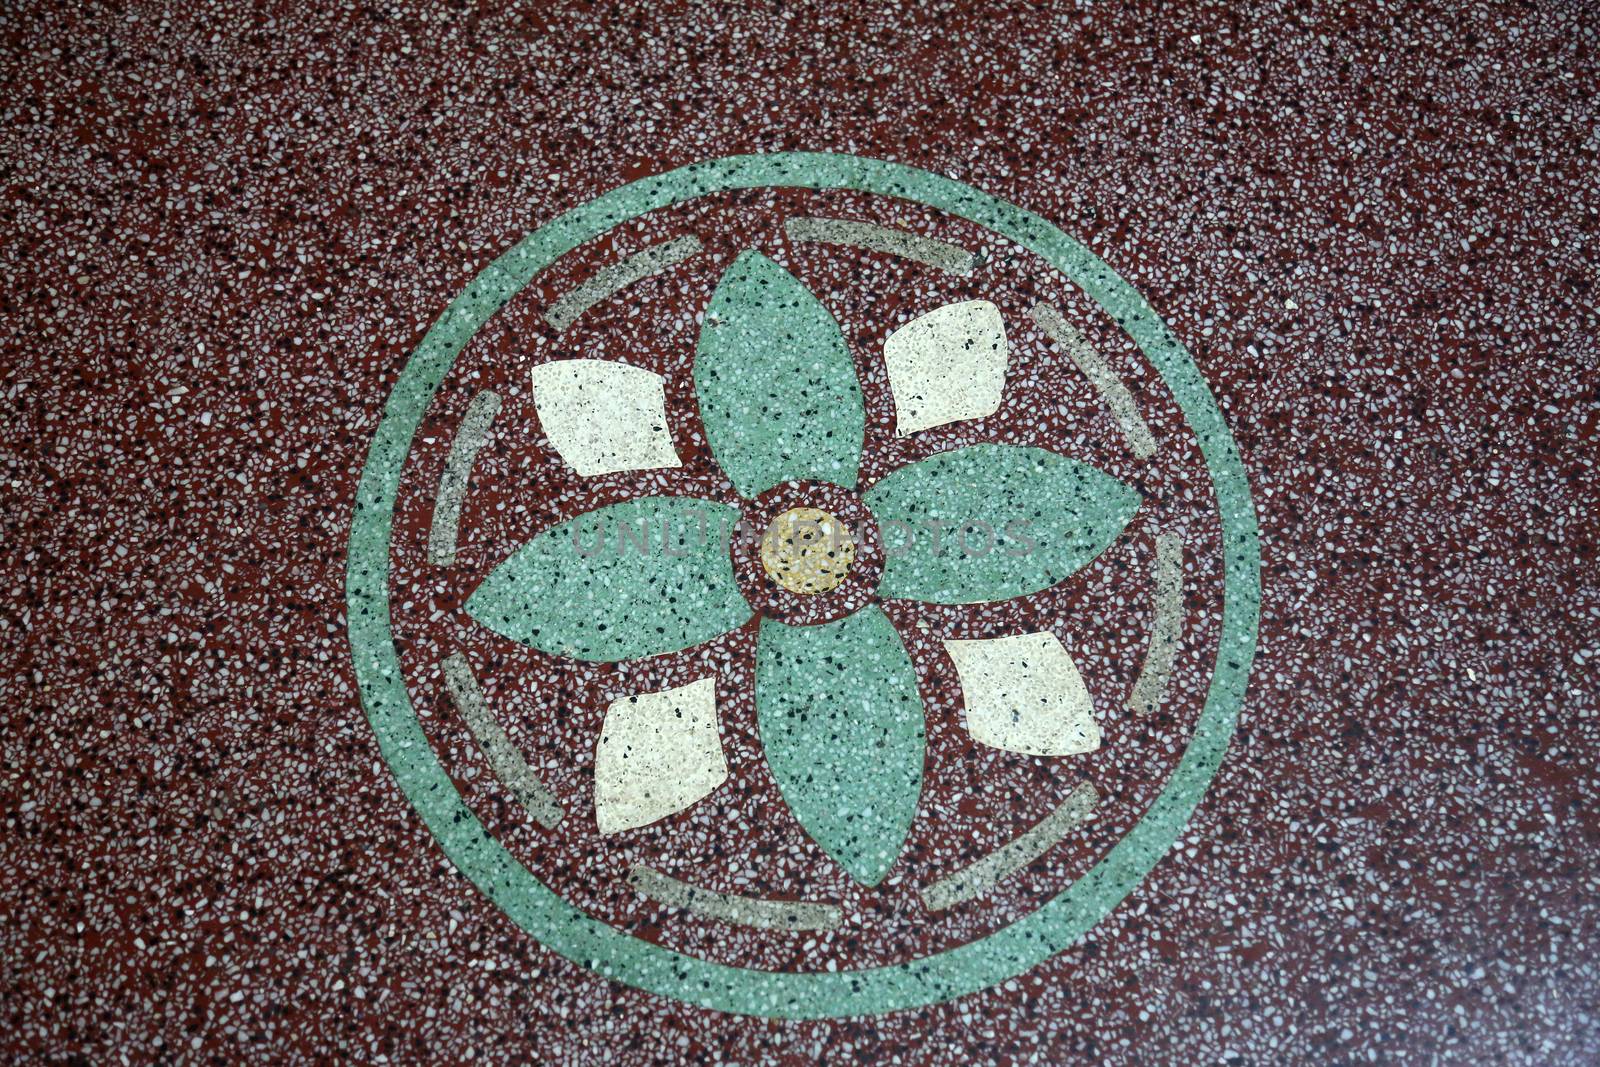 Decorative floor in Daya Dan, one of the houses established by Mother Teresa and run by the Missionaries of Charity, Kolkata by atlas